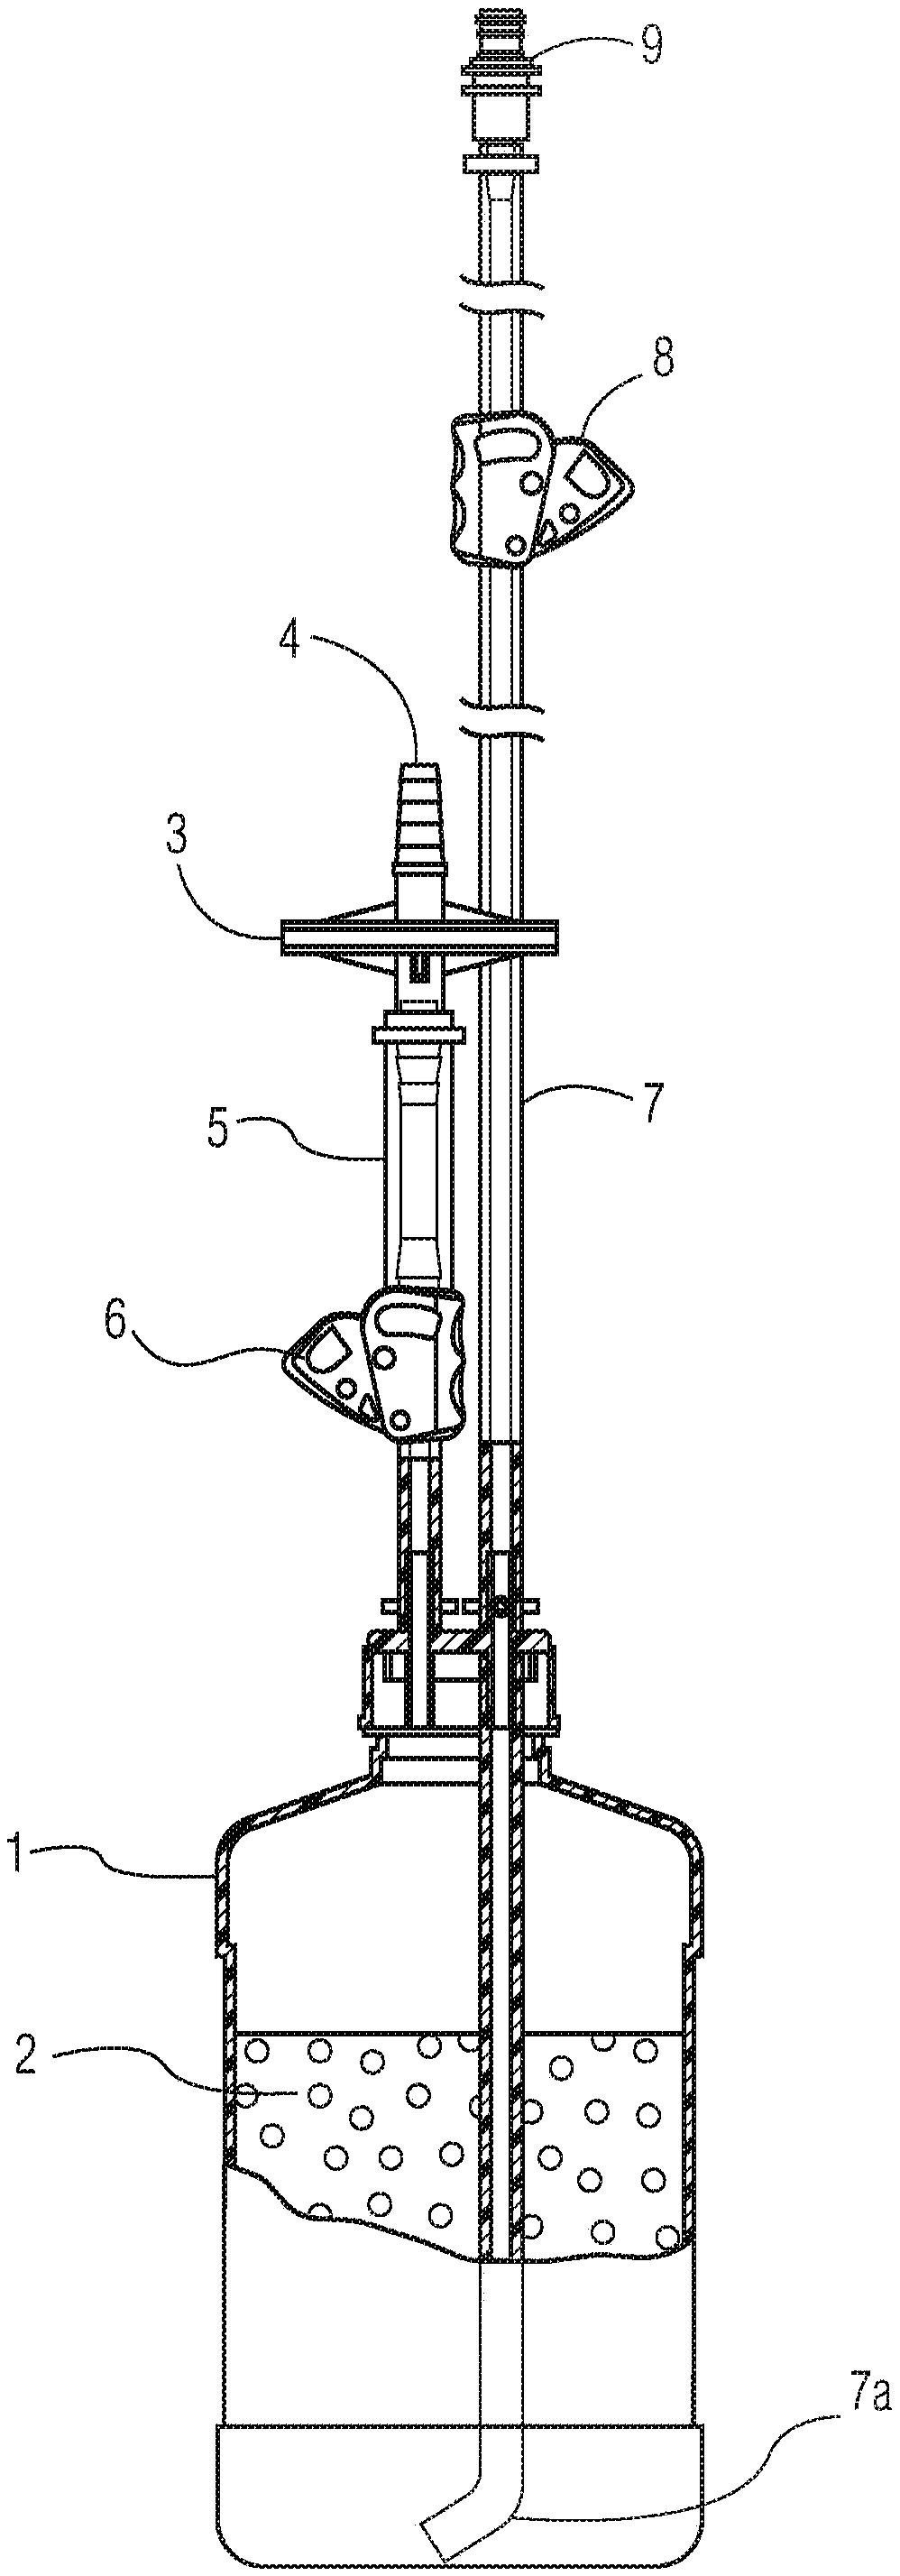 Fixed-bed bioreactor with constant-flow pump/tubing system